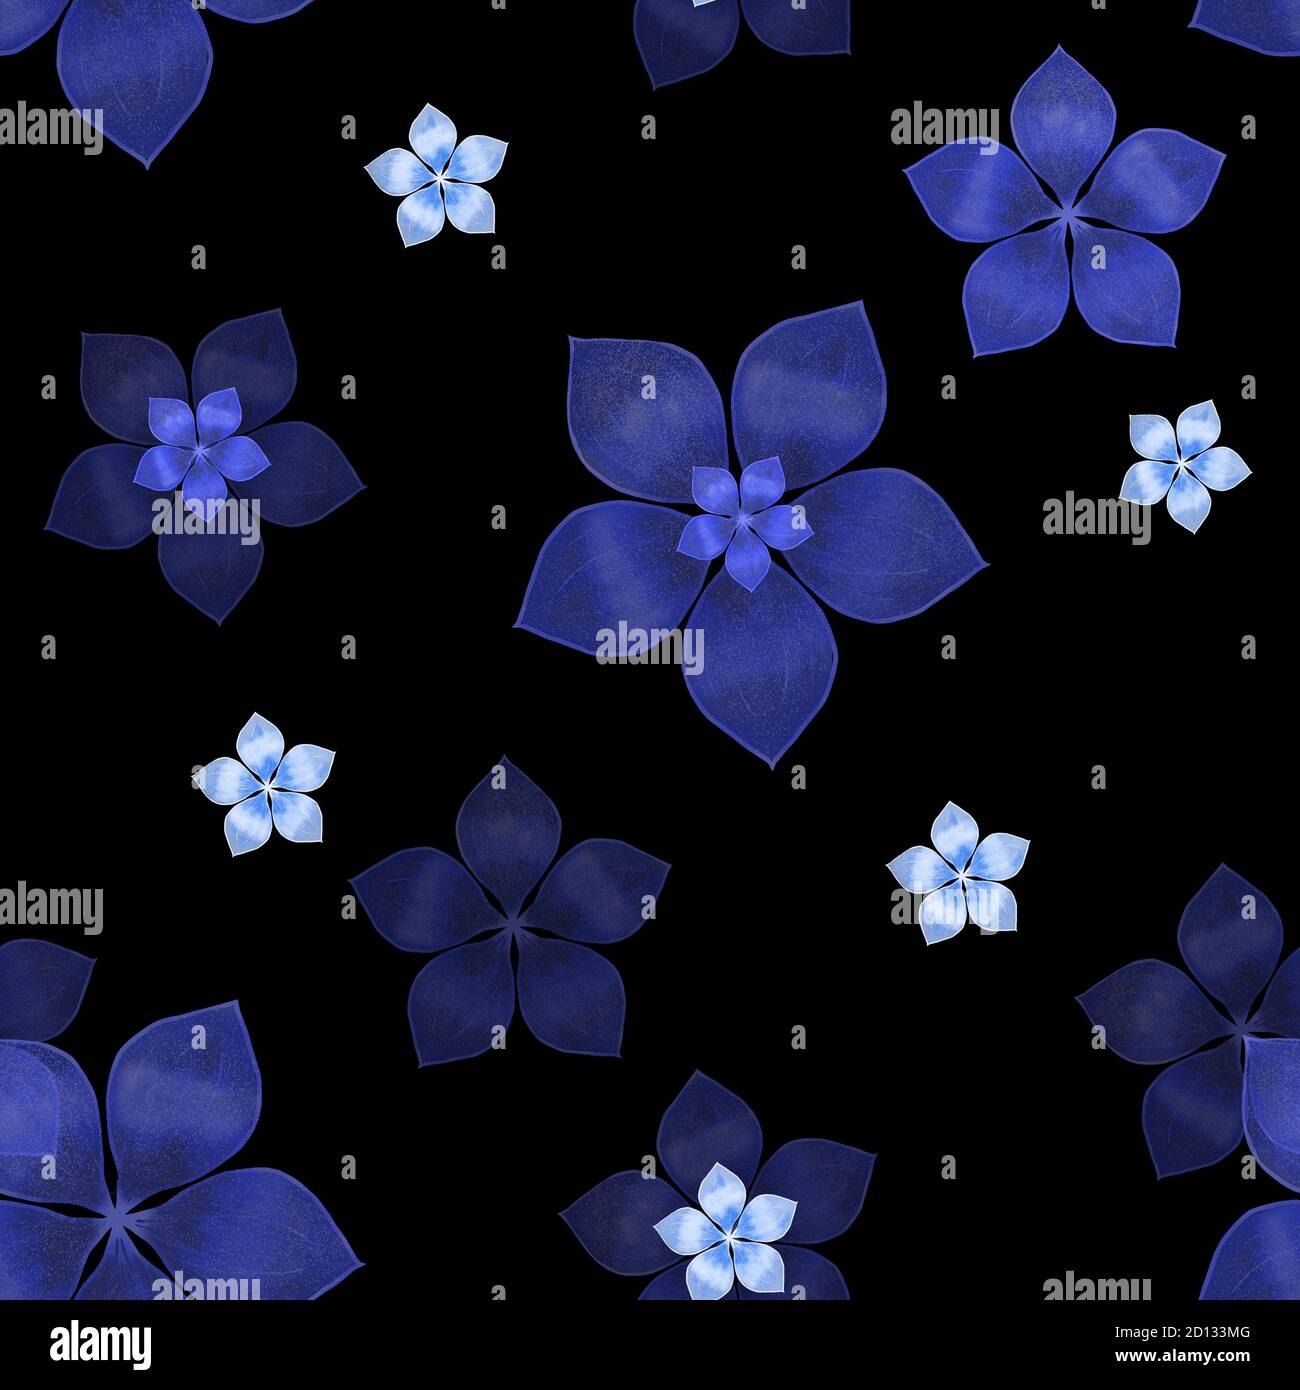 Blue translucent flowers on a black background. Floral seamless pattern. Stock Photo